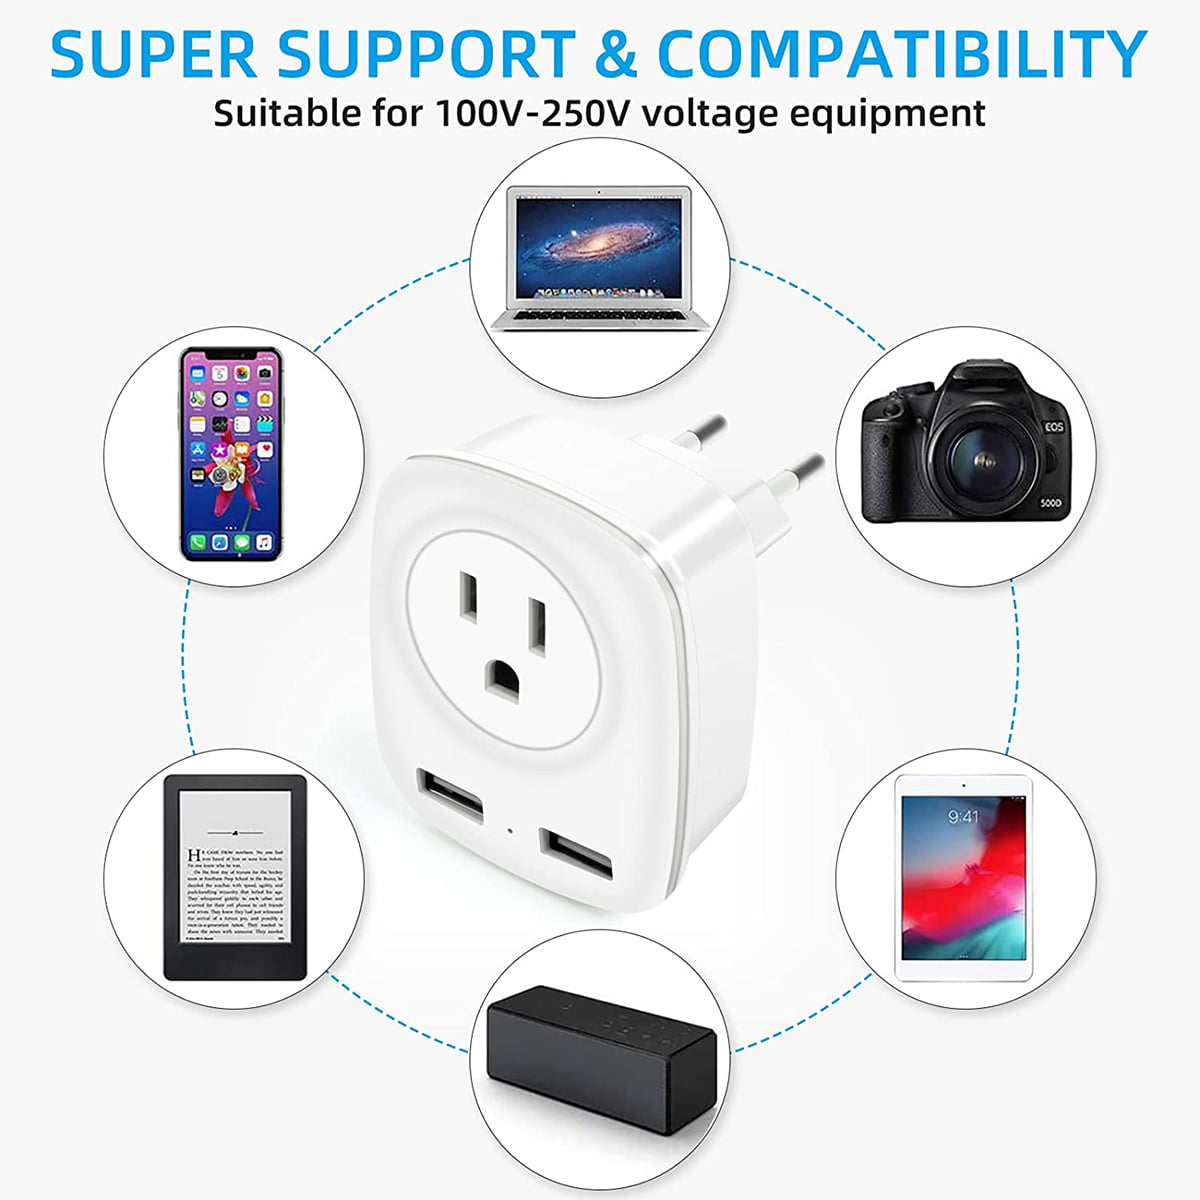 European Travel Plug Adapter with 2 USB,Conversion Plug for US to Most of Europe Italy Spain 